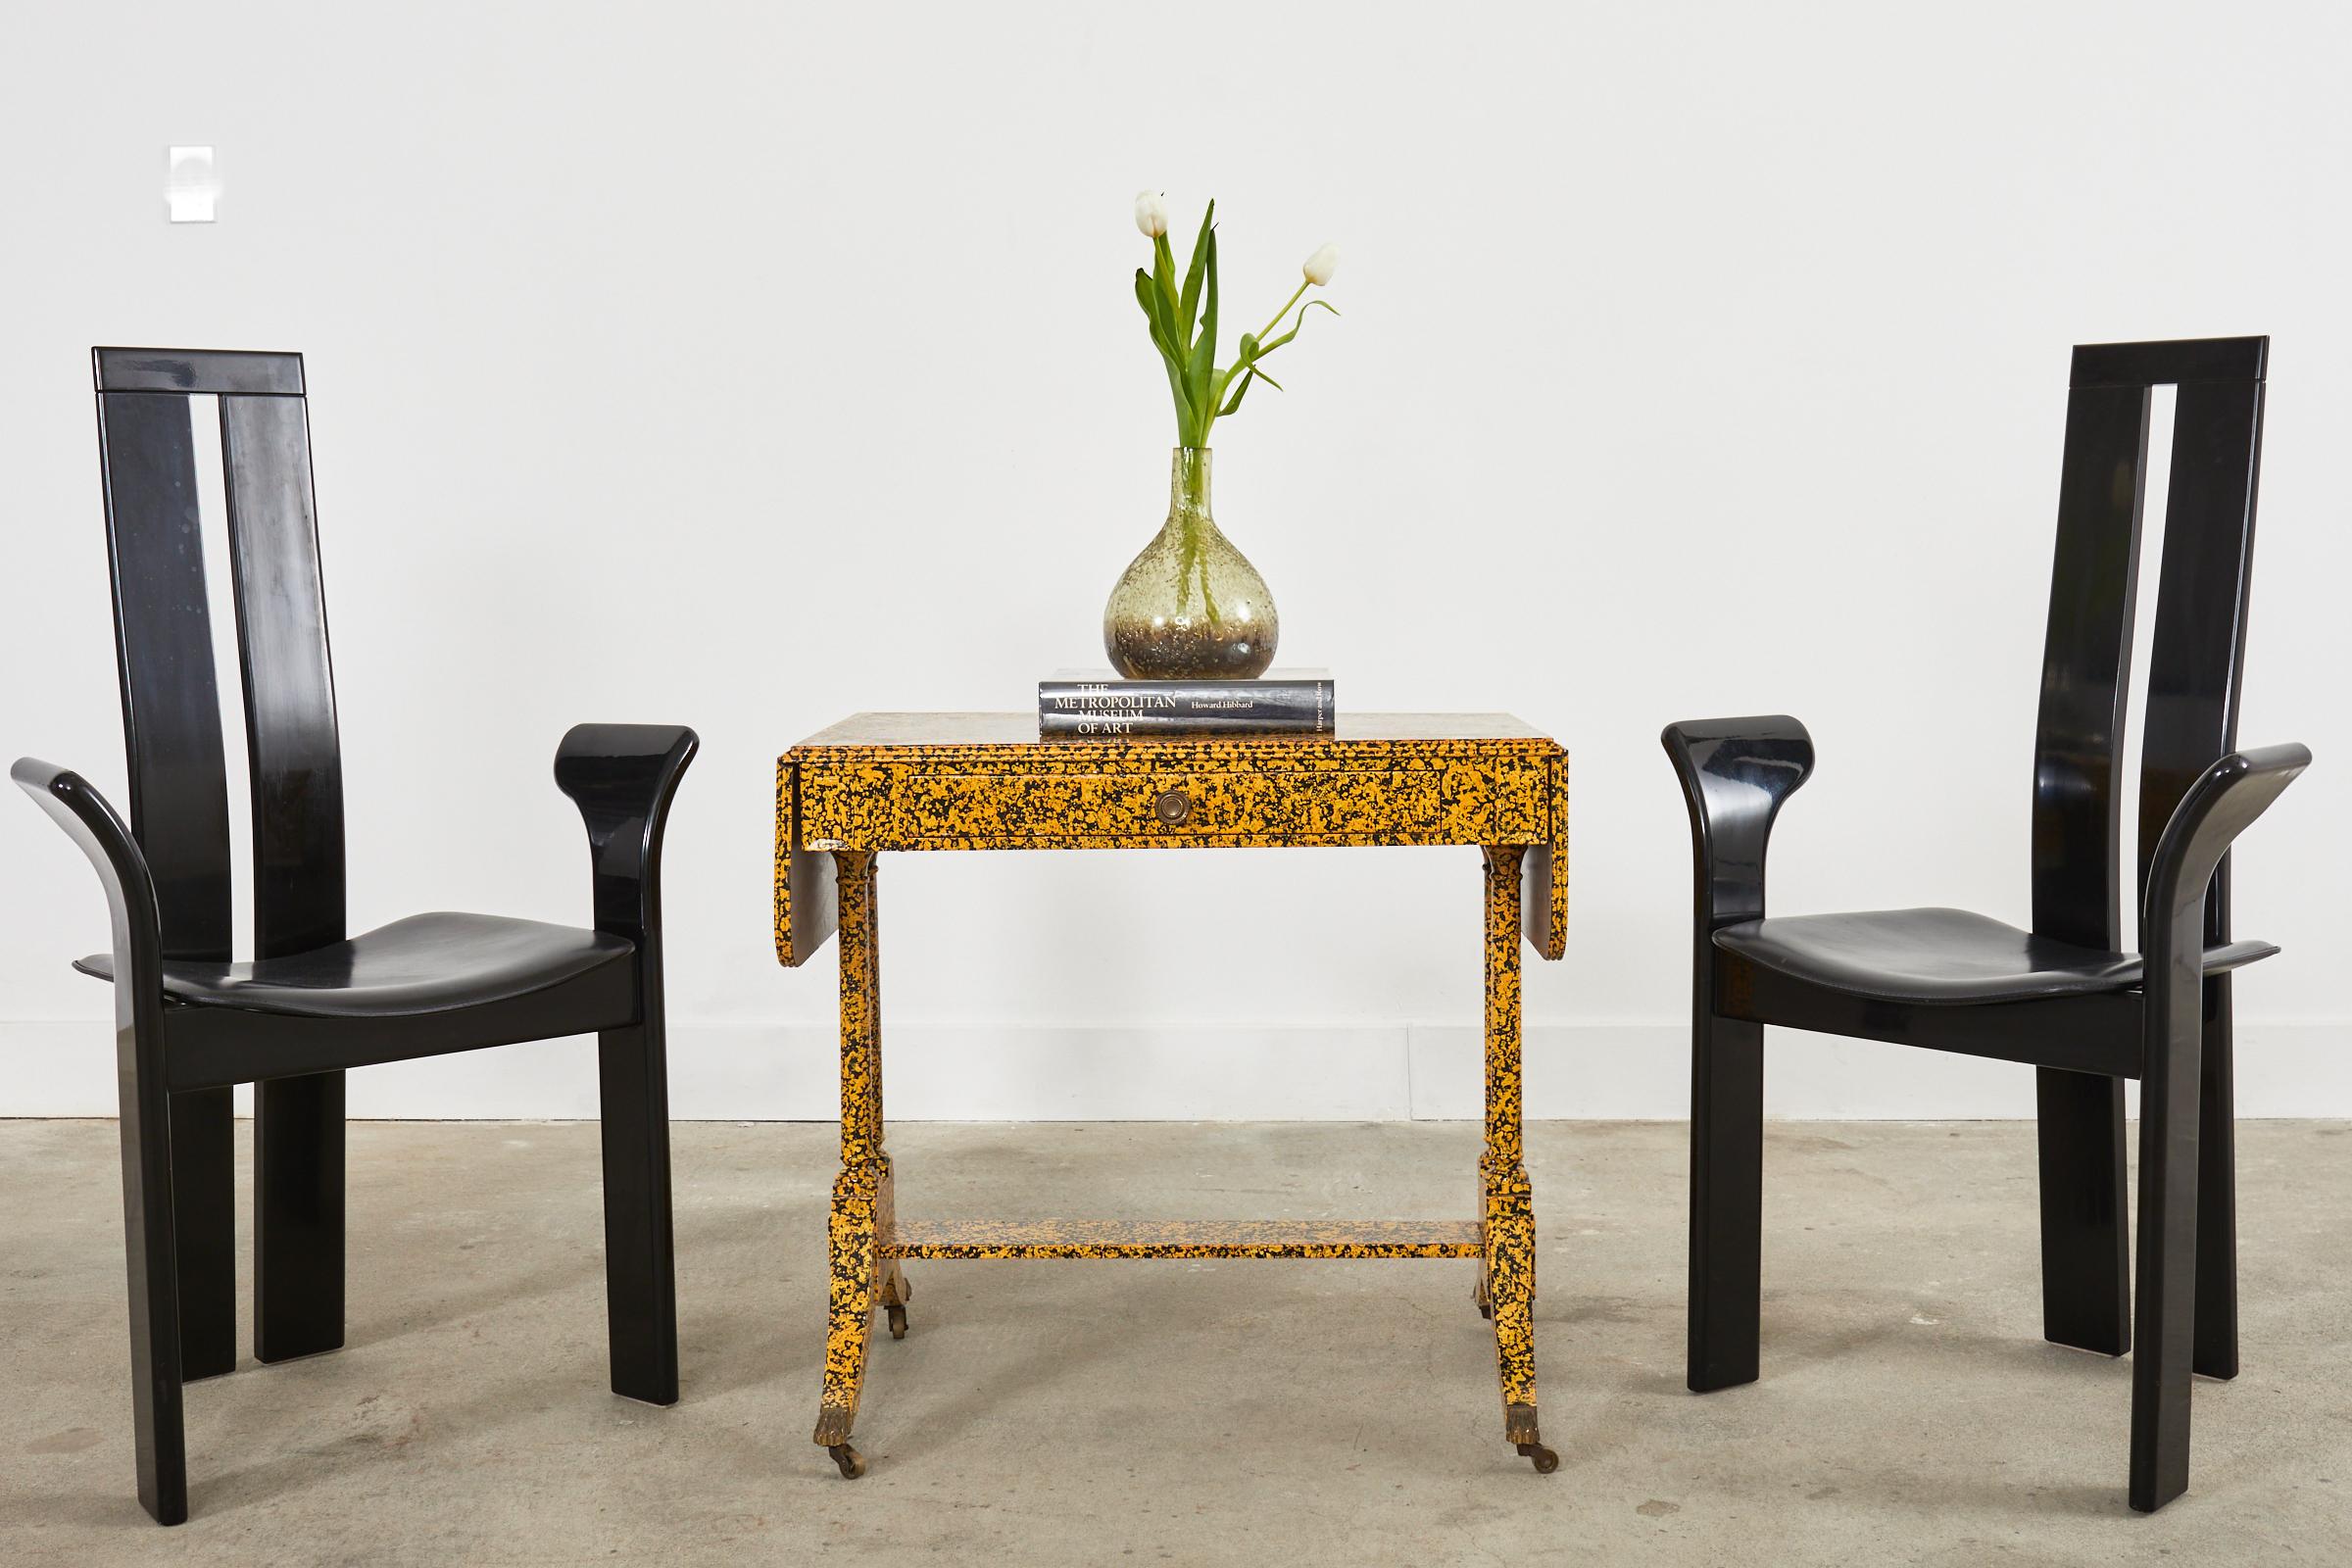 Whimsical late 19th century English mahogany drop-leaf writing table featuring a speckled lacquer finish by artist Ira Yeager (1933-2022 American). The elegant table is crafted in the regency taste with a drop-leaf case fronted by a small storage